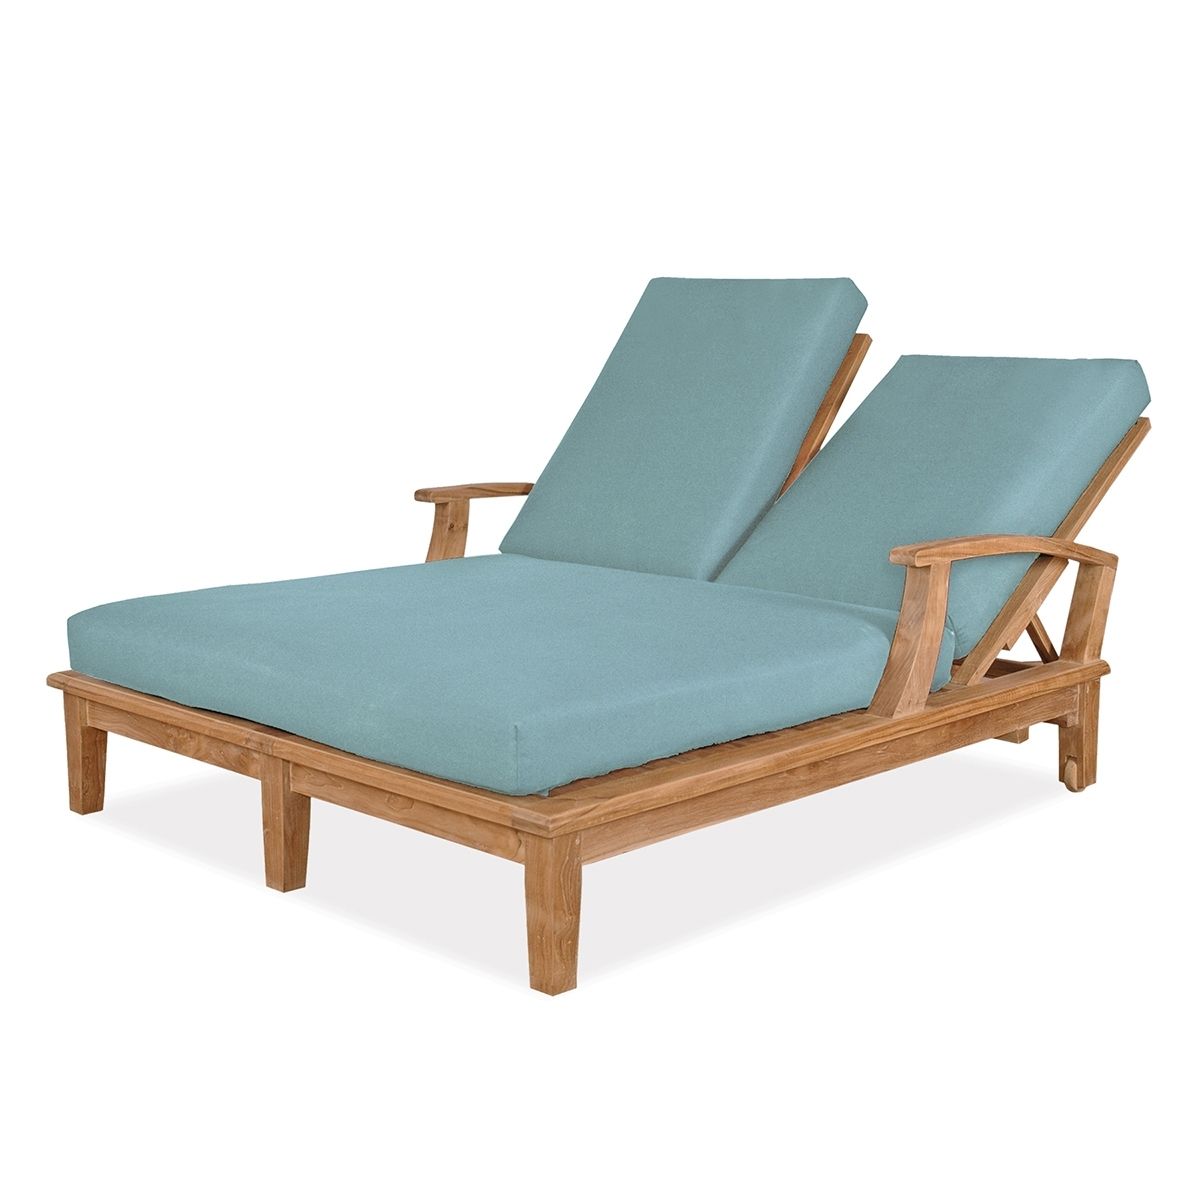 Veranda Collection For Fabric Outdoor Chaise Lounge Chairs (View 3 of 15)